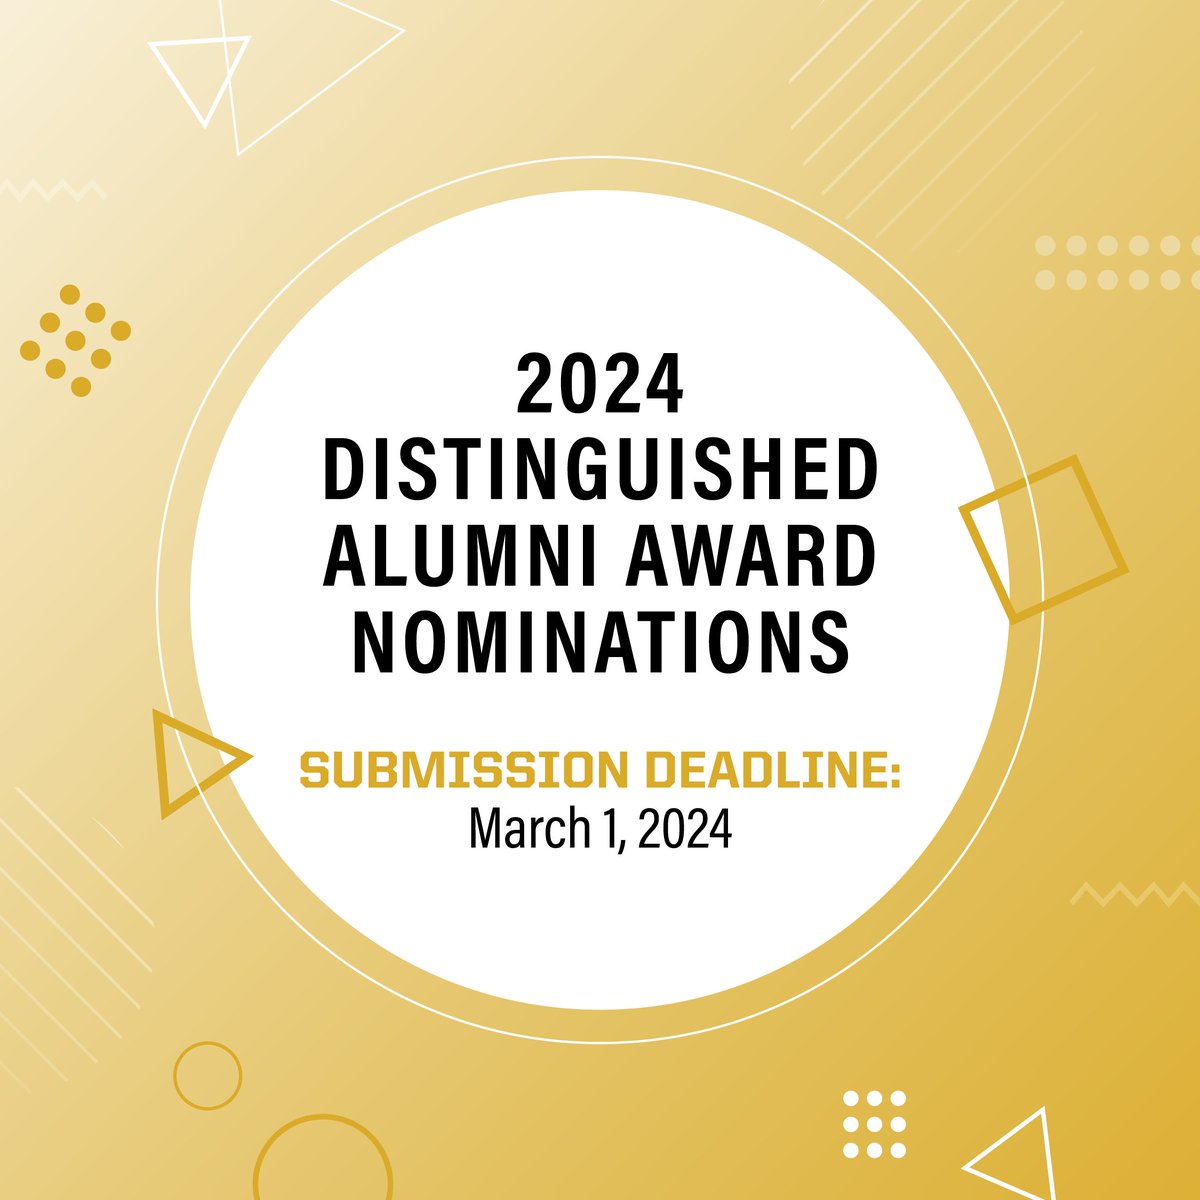 DEADLINE SOON! Do you know an exceptional Liberal Arts alumnus who is a change agent in their community? If so, please take a moment to nominate them for the 2024 Distinguished Alumni Awards! Nominations are due by March 1: purdue.ca1.qualtrics.com/jfe/form/SV_8A…